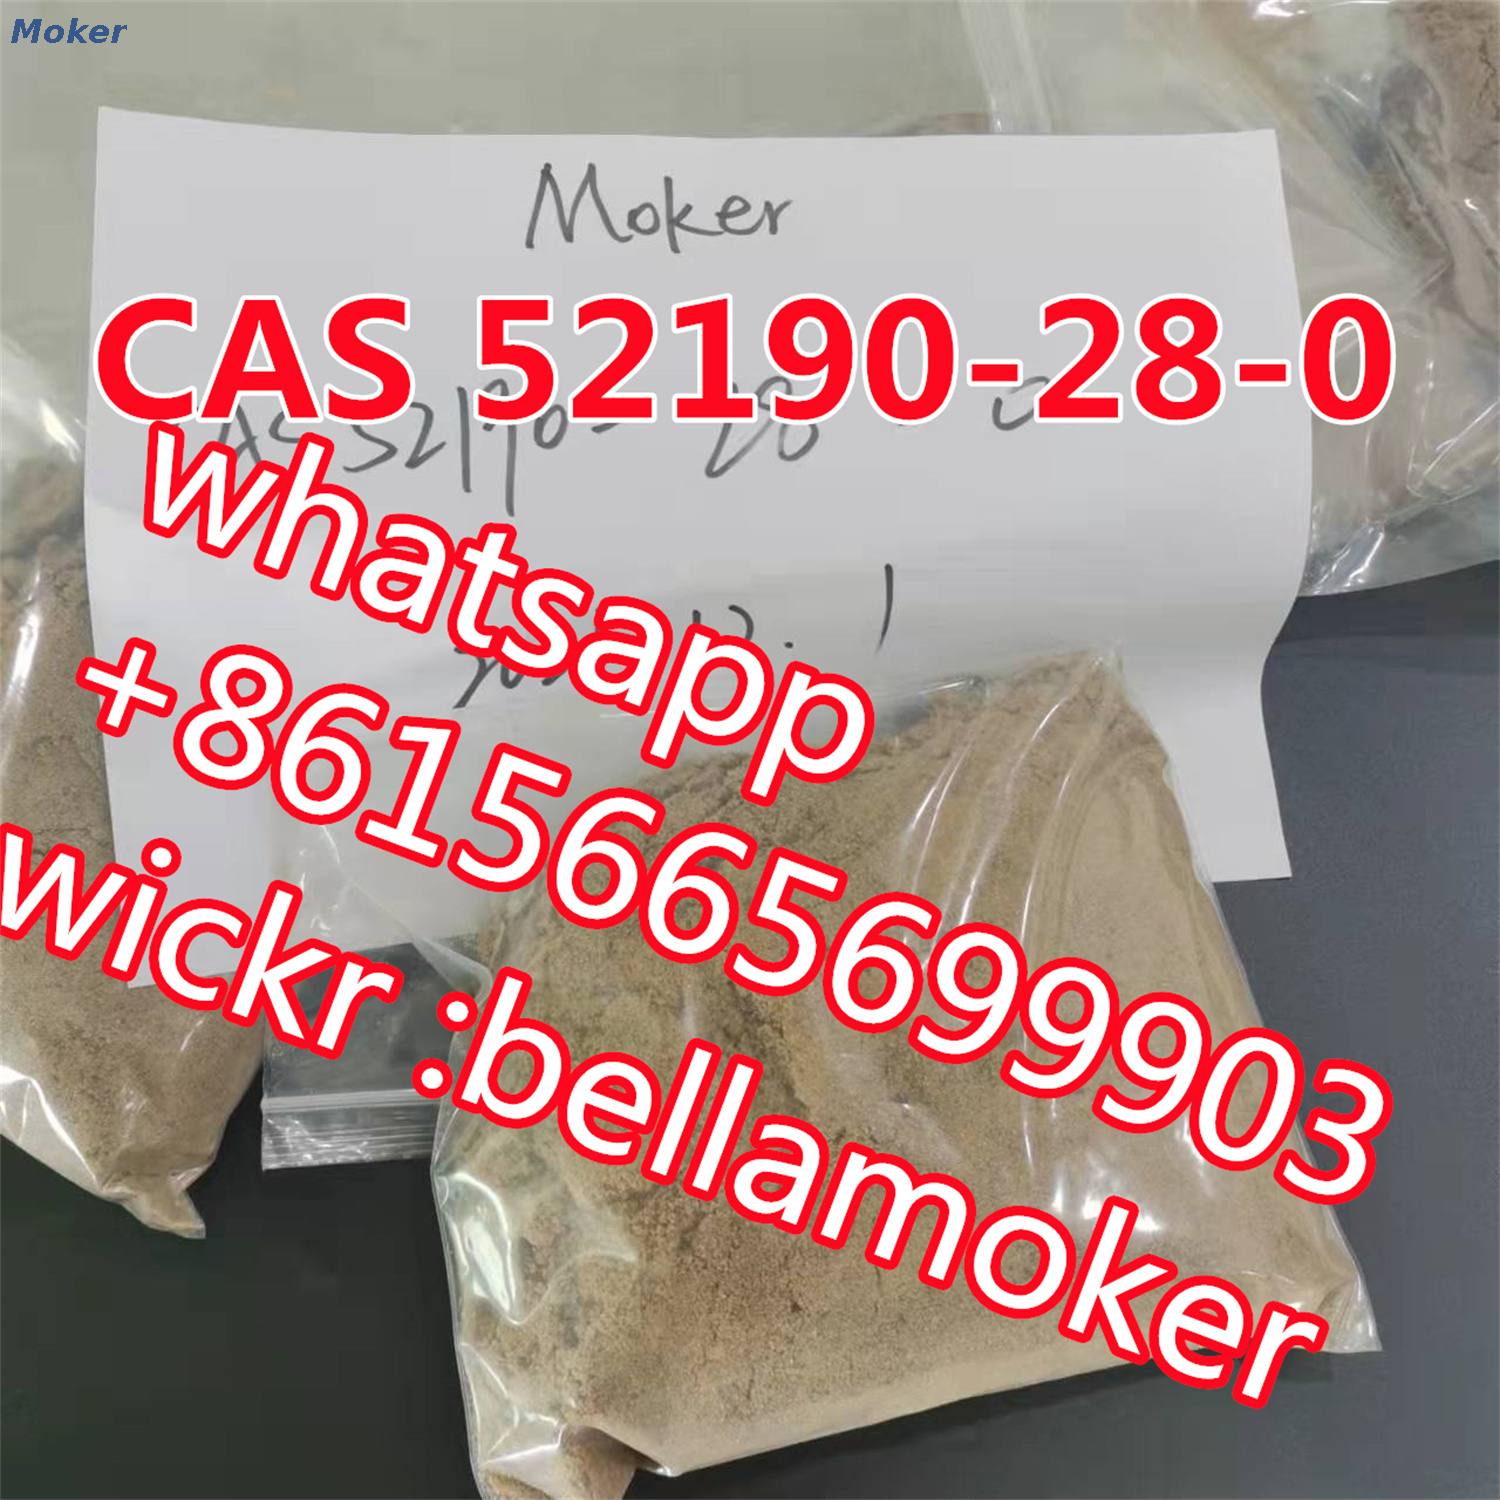 BMK Glycidate Crystal CAS 52190-28-0 BMK Oil 20320-59-6/5413-05-8/718-08-1 Pmk Oil 28578-16-7 China Supplier with Safe Delivery